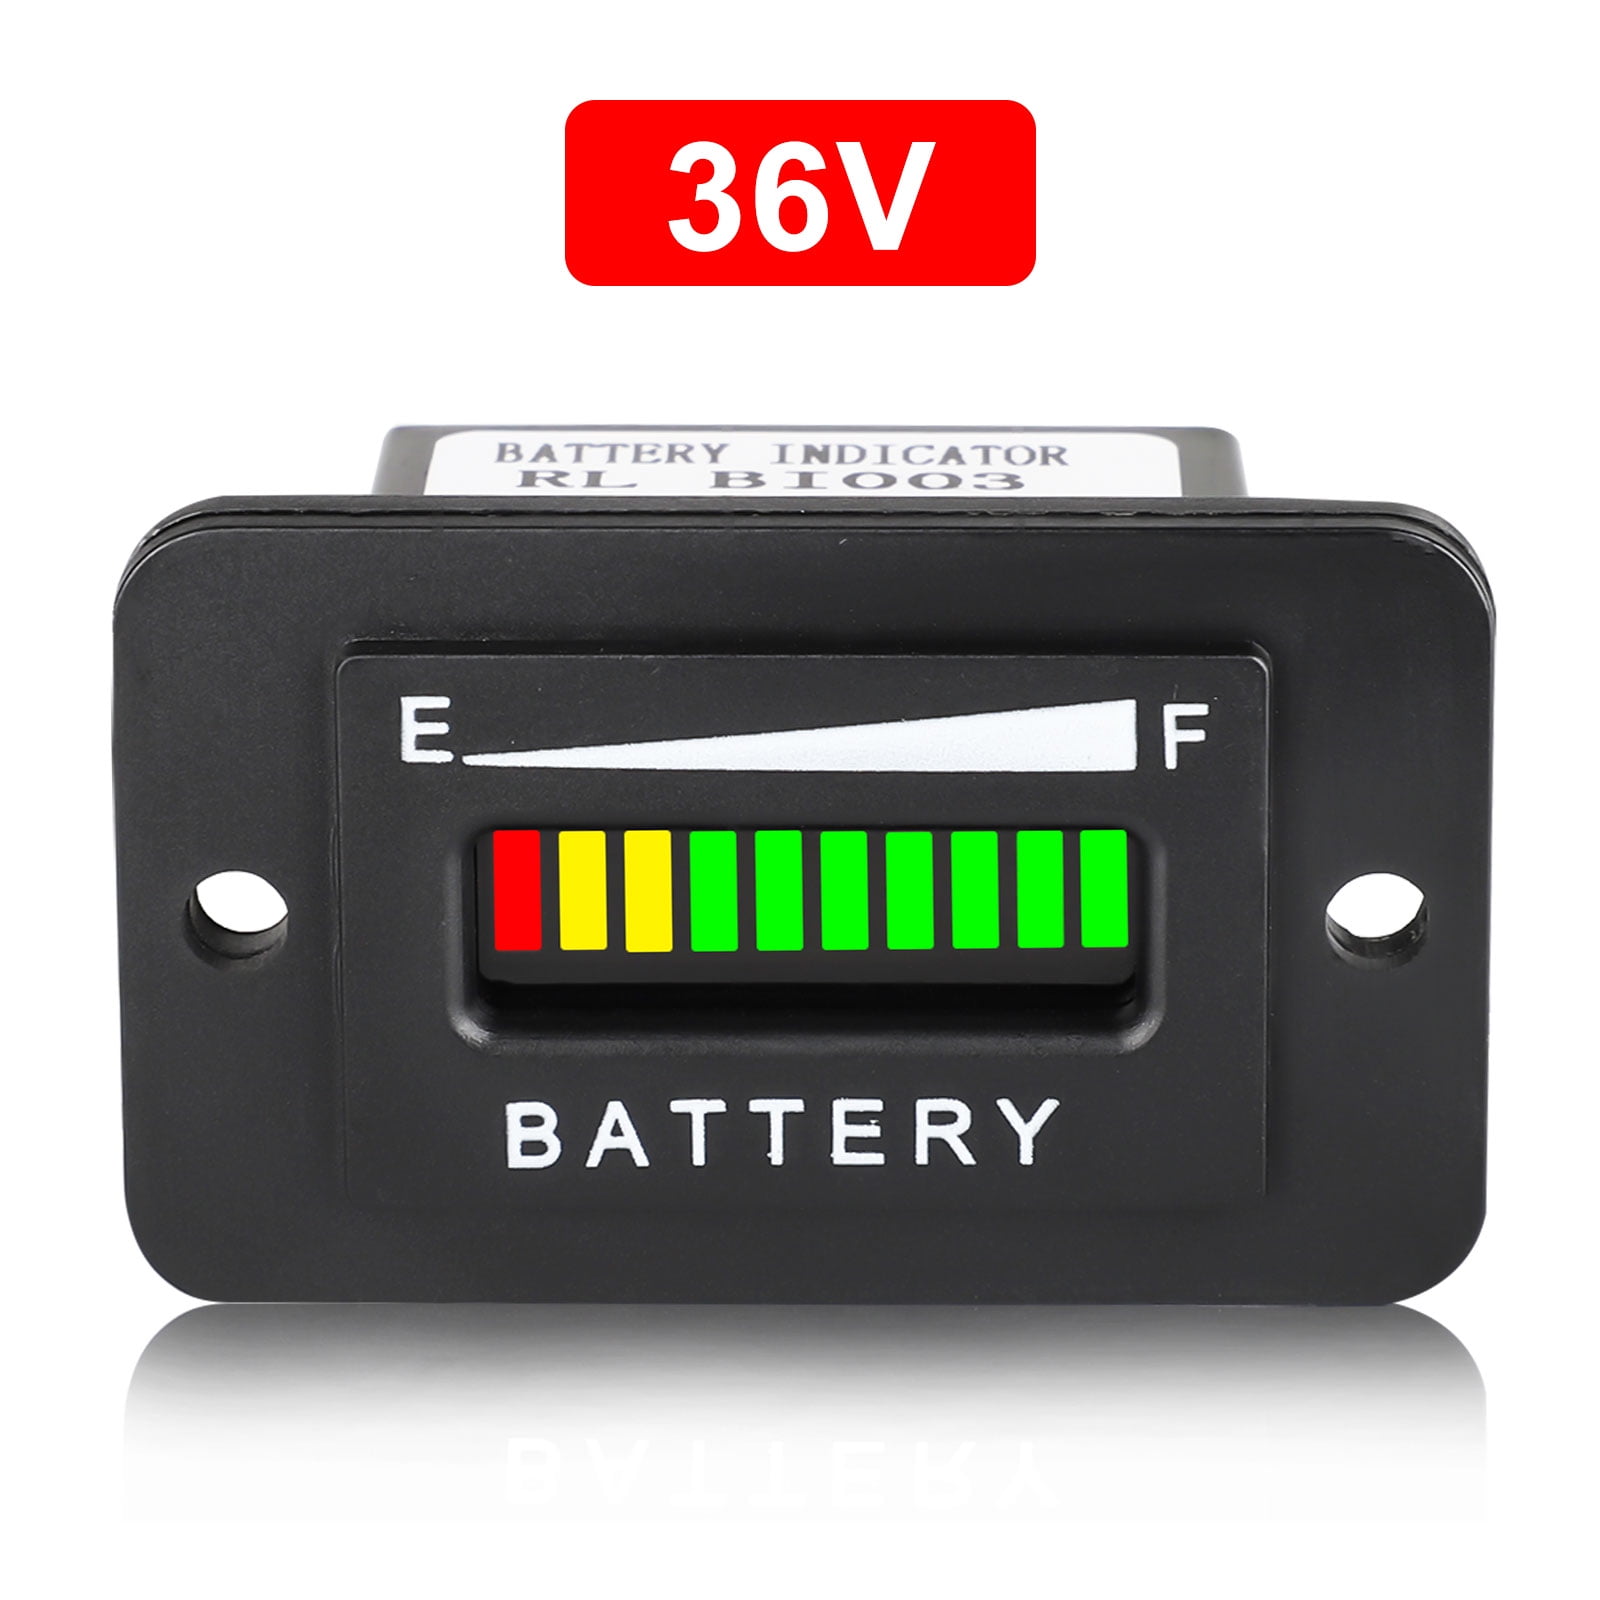 12V LED Battery State Charge Indicator Meter with Hour Meter Function 12 Volt 